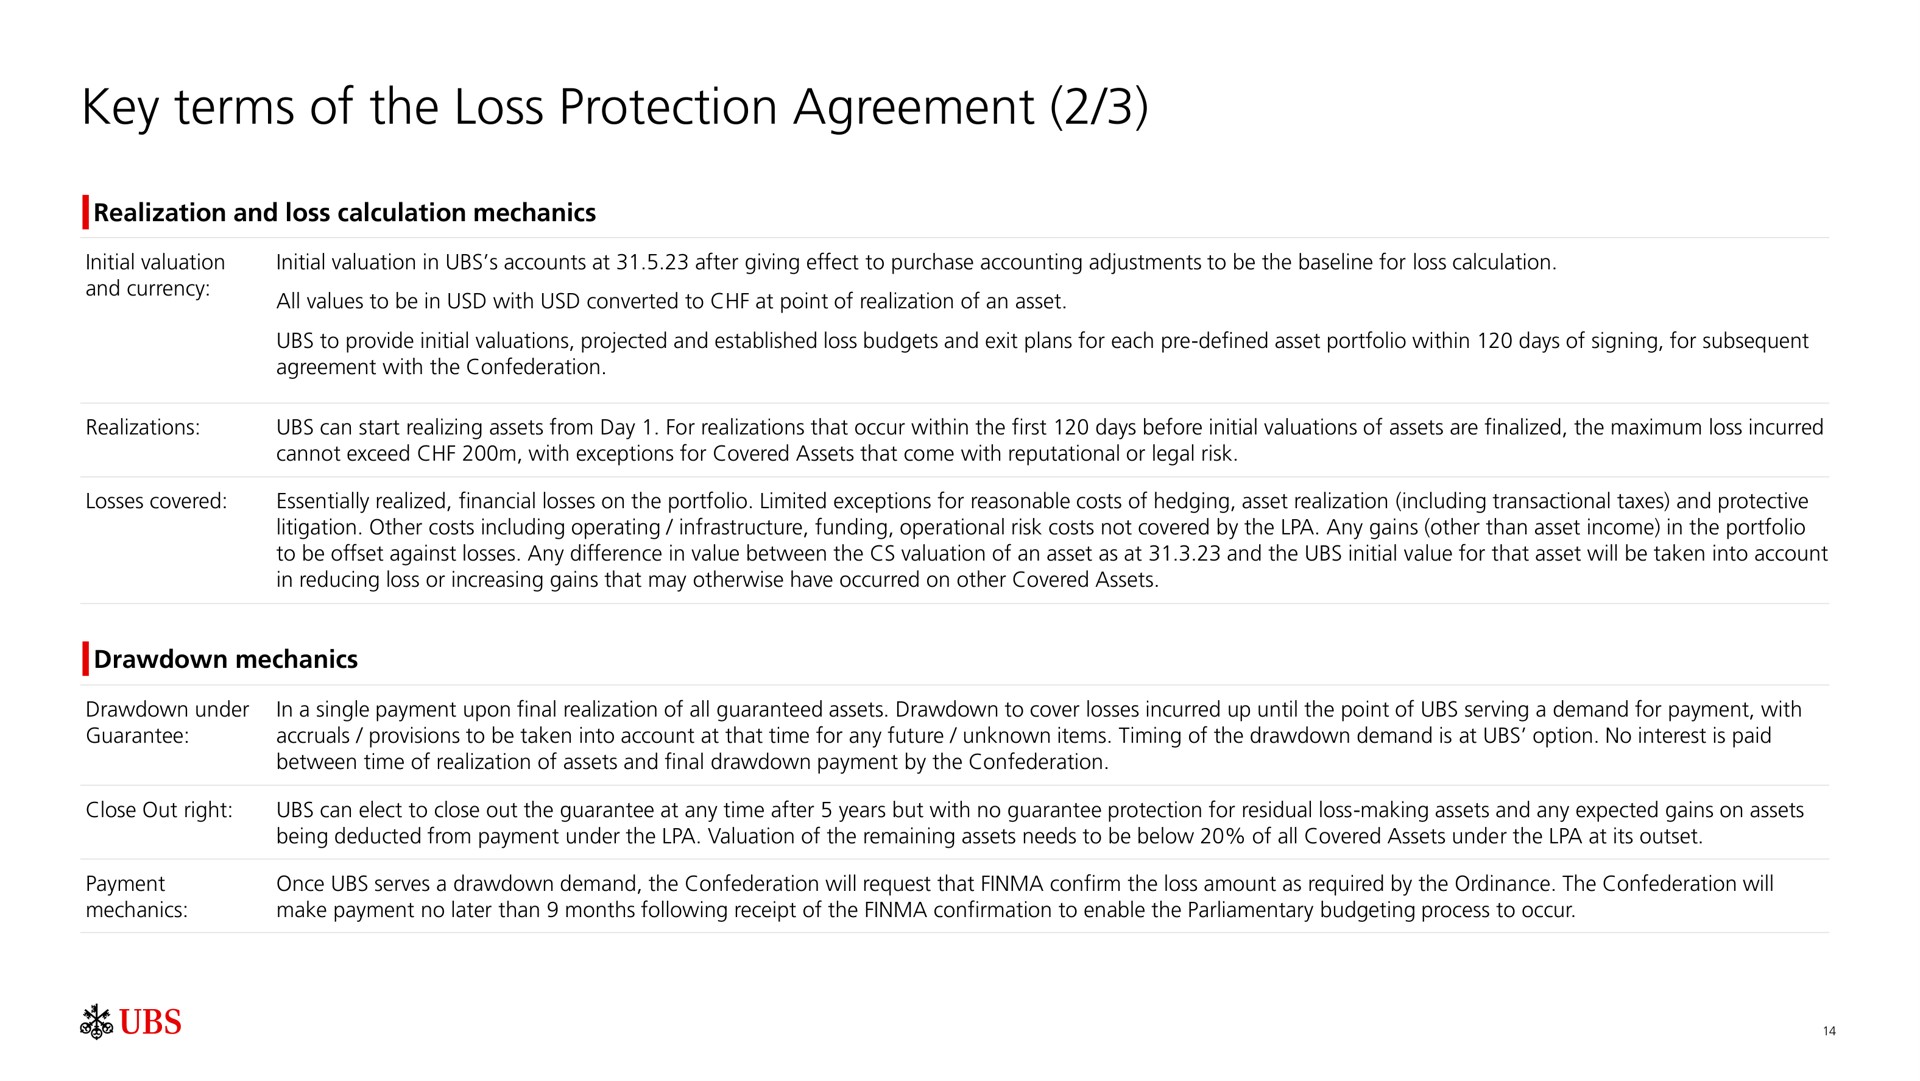 key terms of the loss protection agreement | UBS